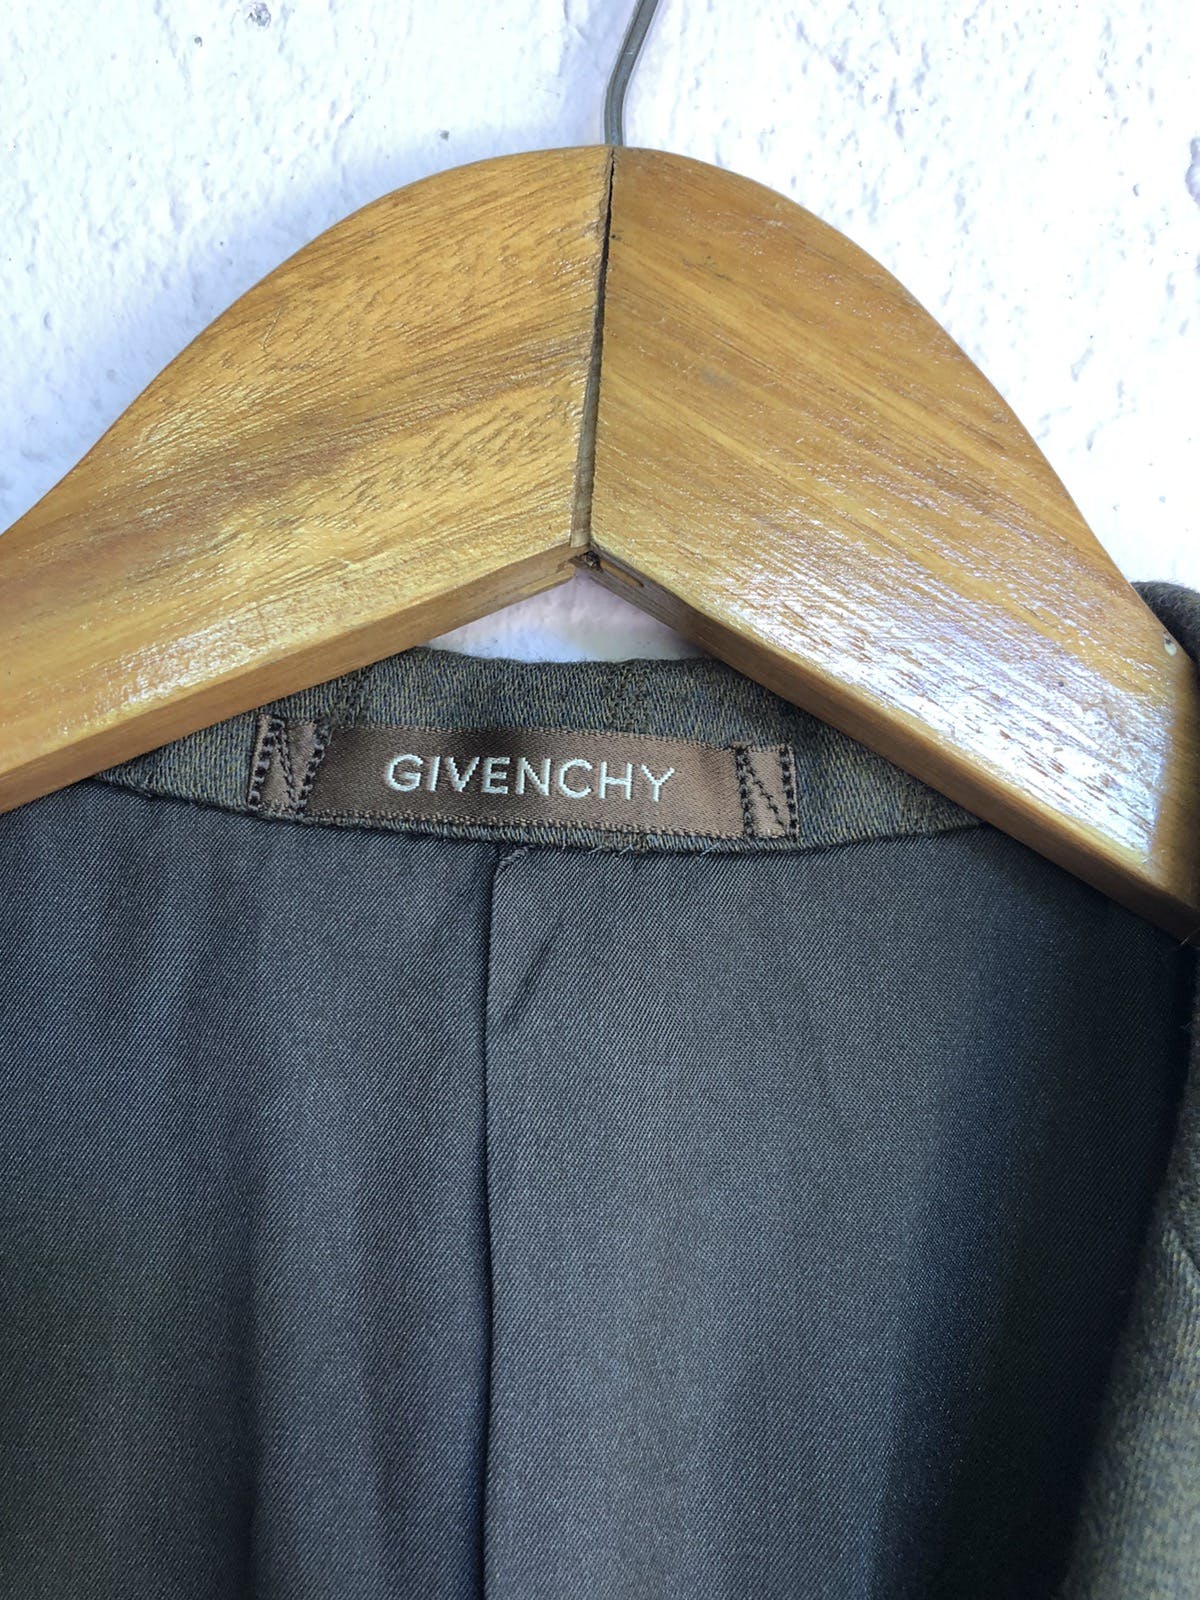 Givenchy Men’s tailored jackets good condition - 7